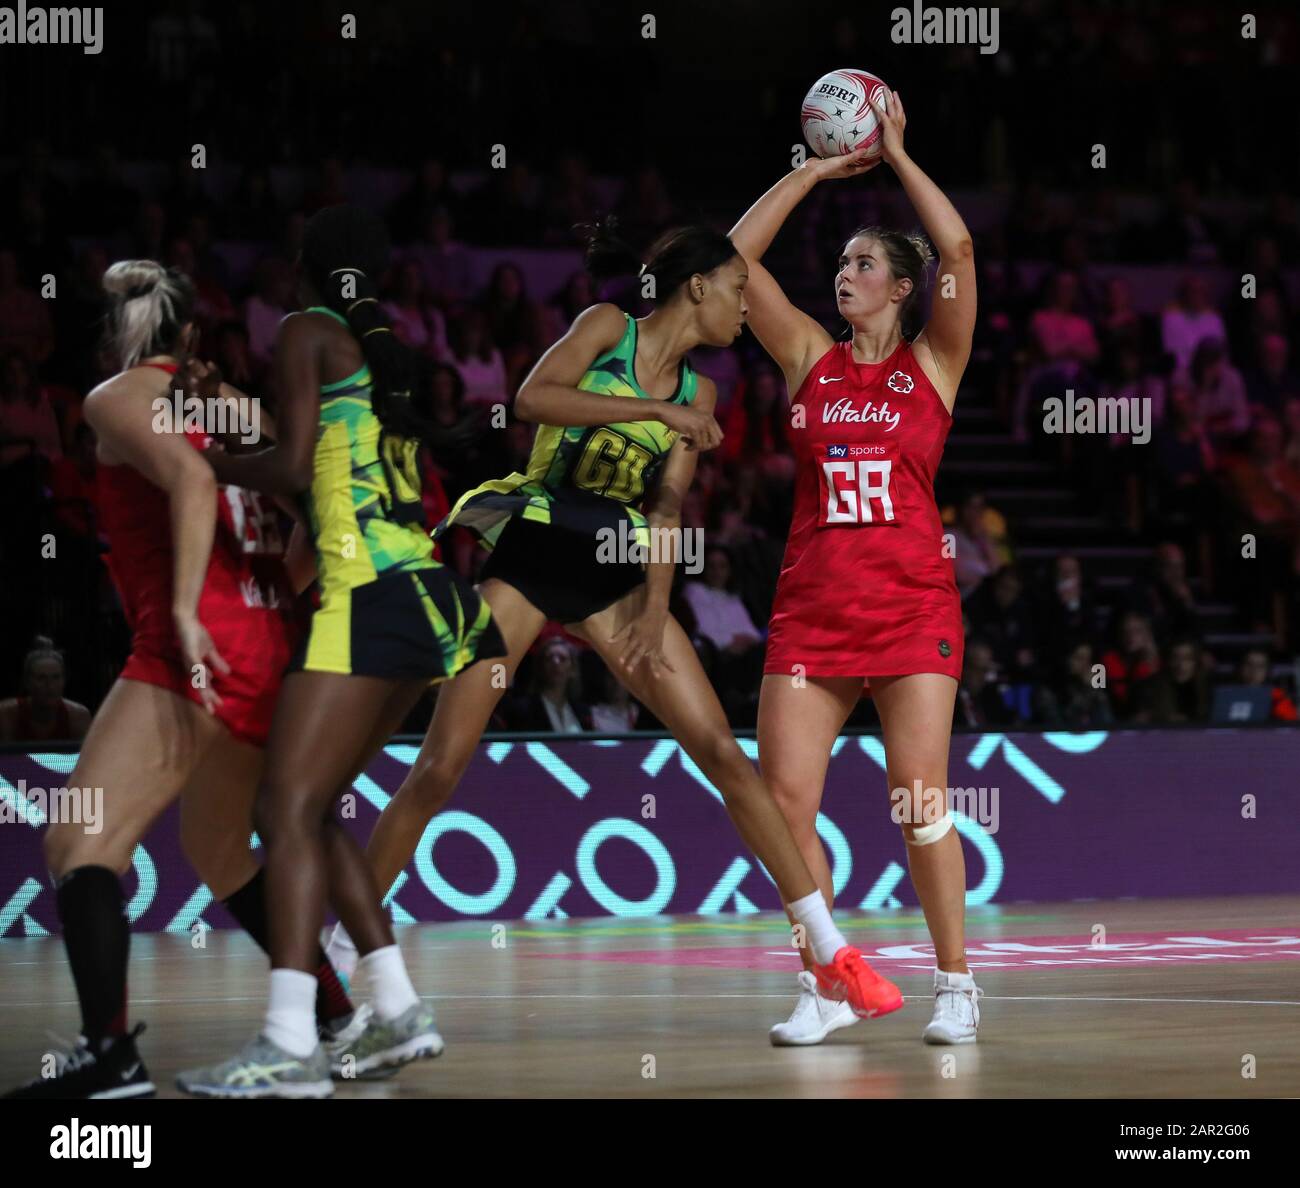 George Fisher von England Vitality Roses während des Vitality Netball Nations Cup Matches in Der Copper Box, London. Stockfoto